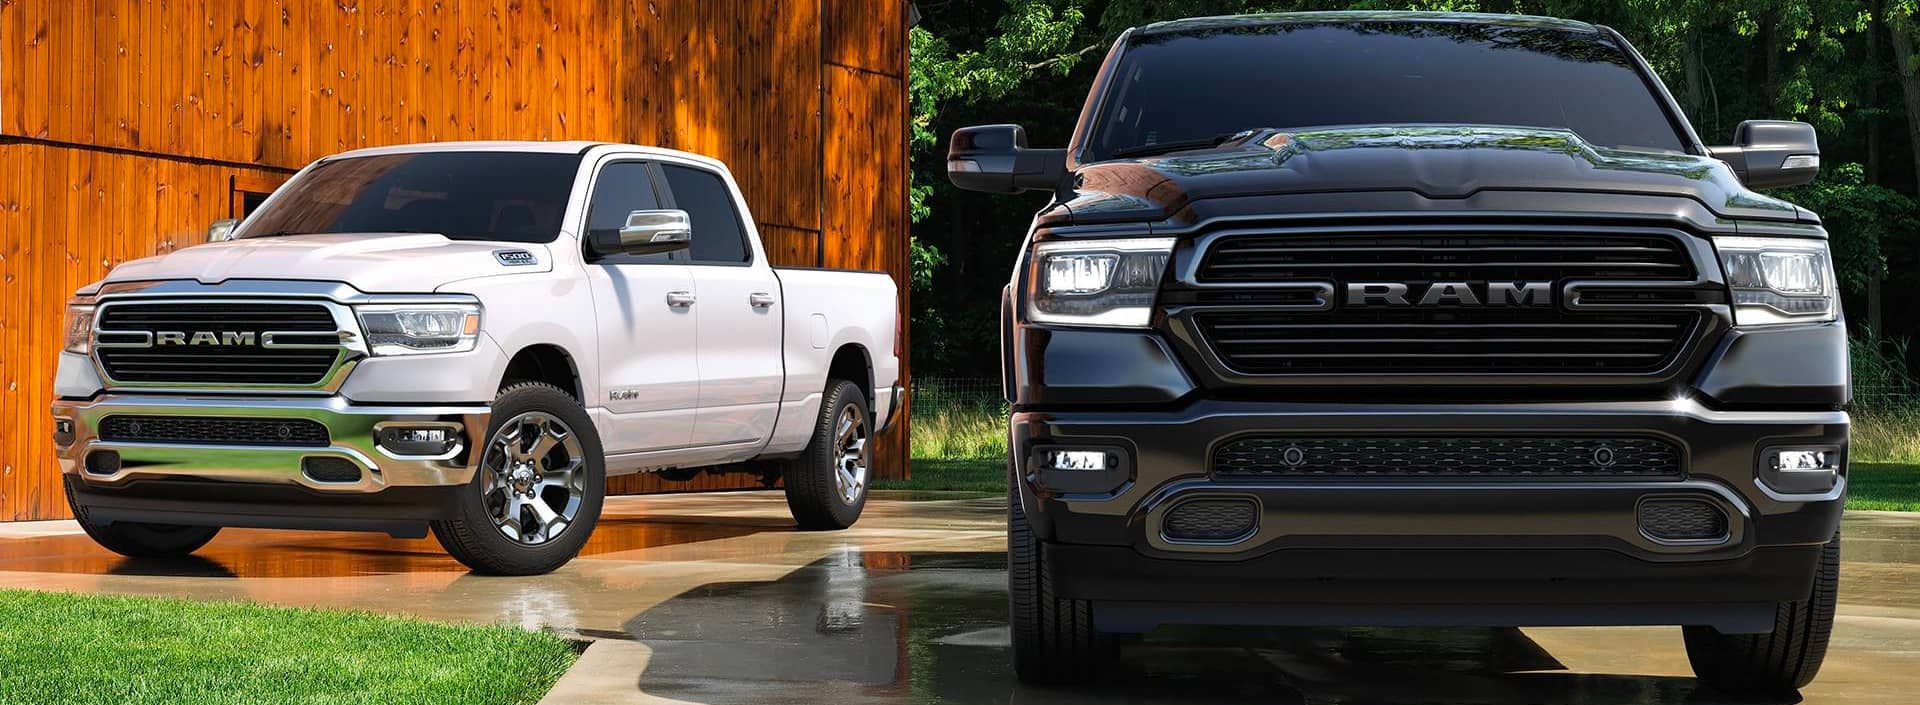 two ram trucks parked